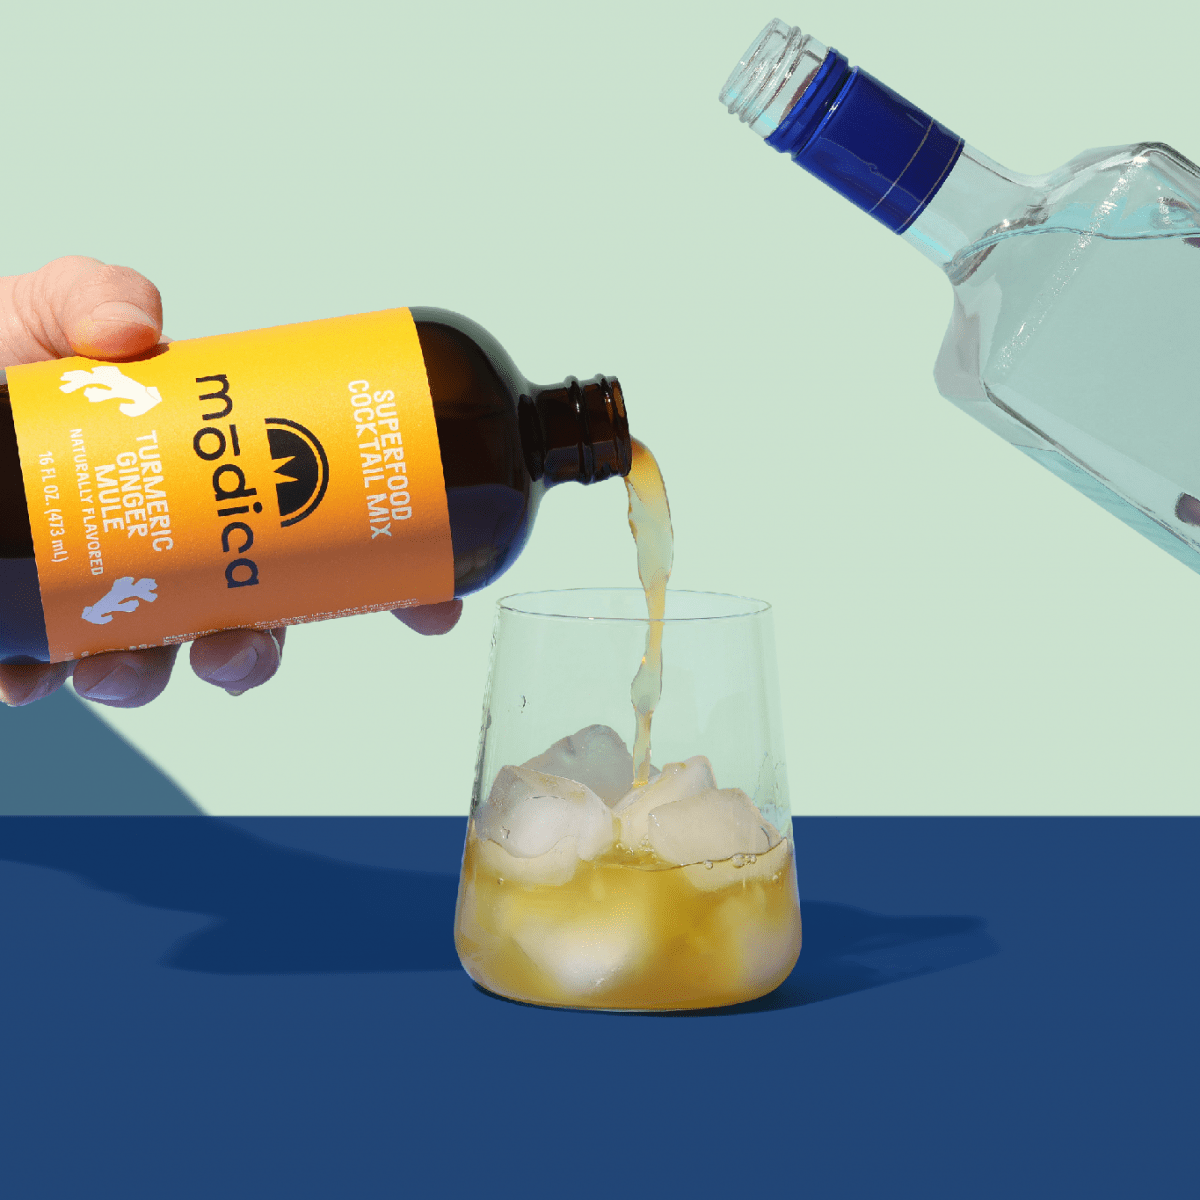 14 Craft Cocktail Mixers For the Host Who Has It All